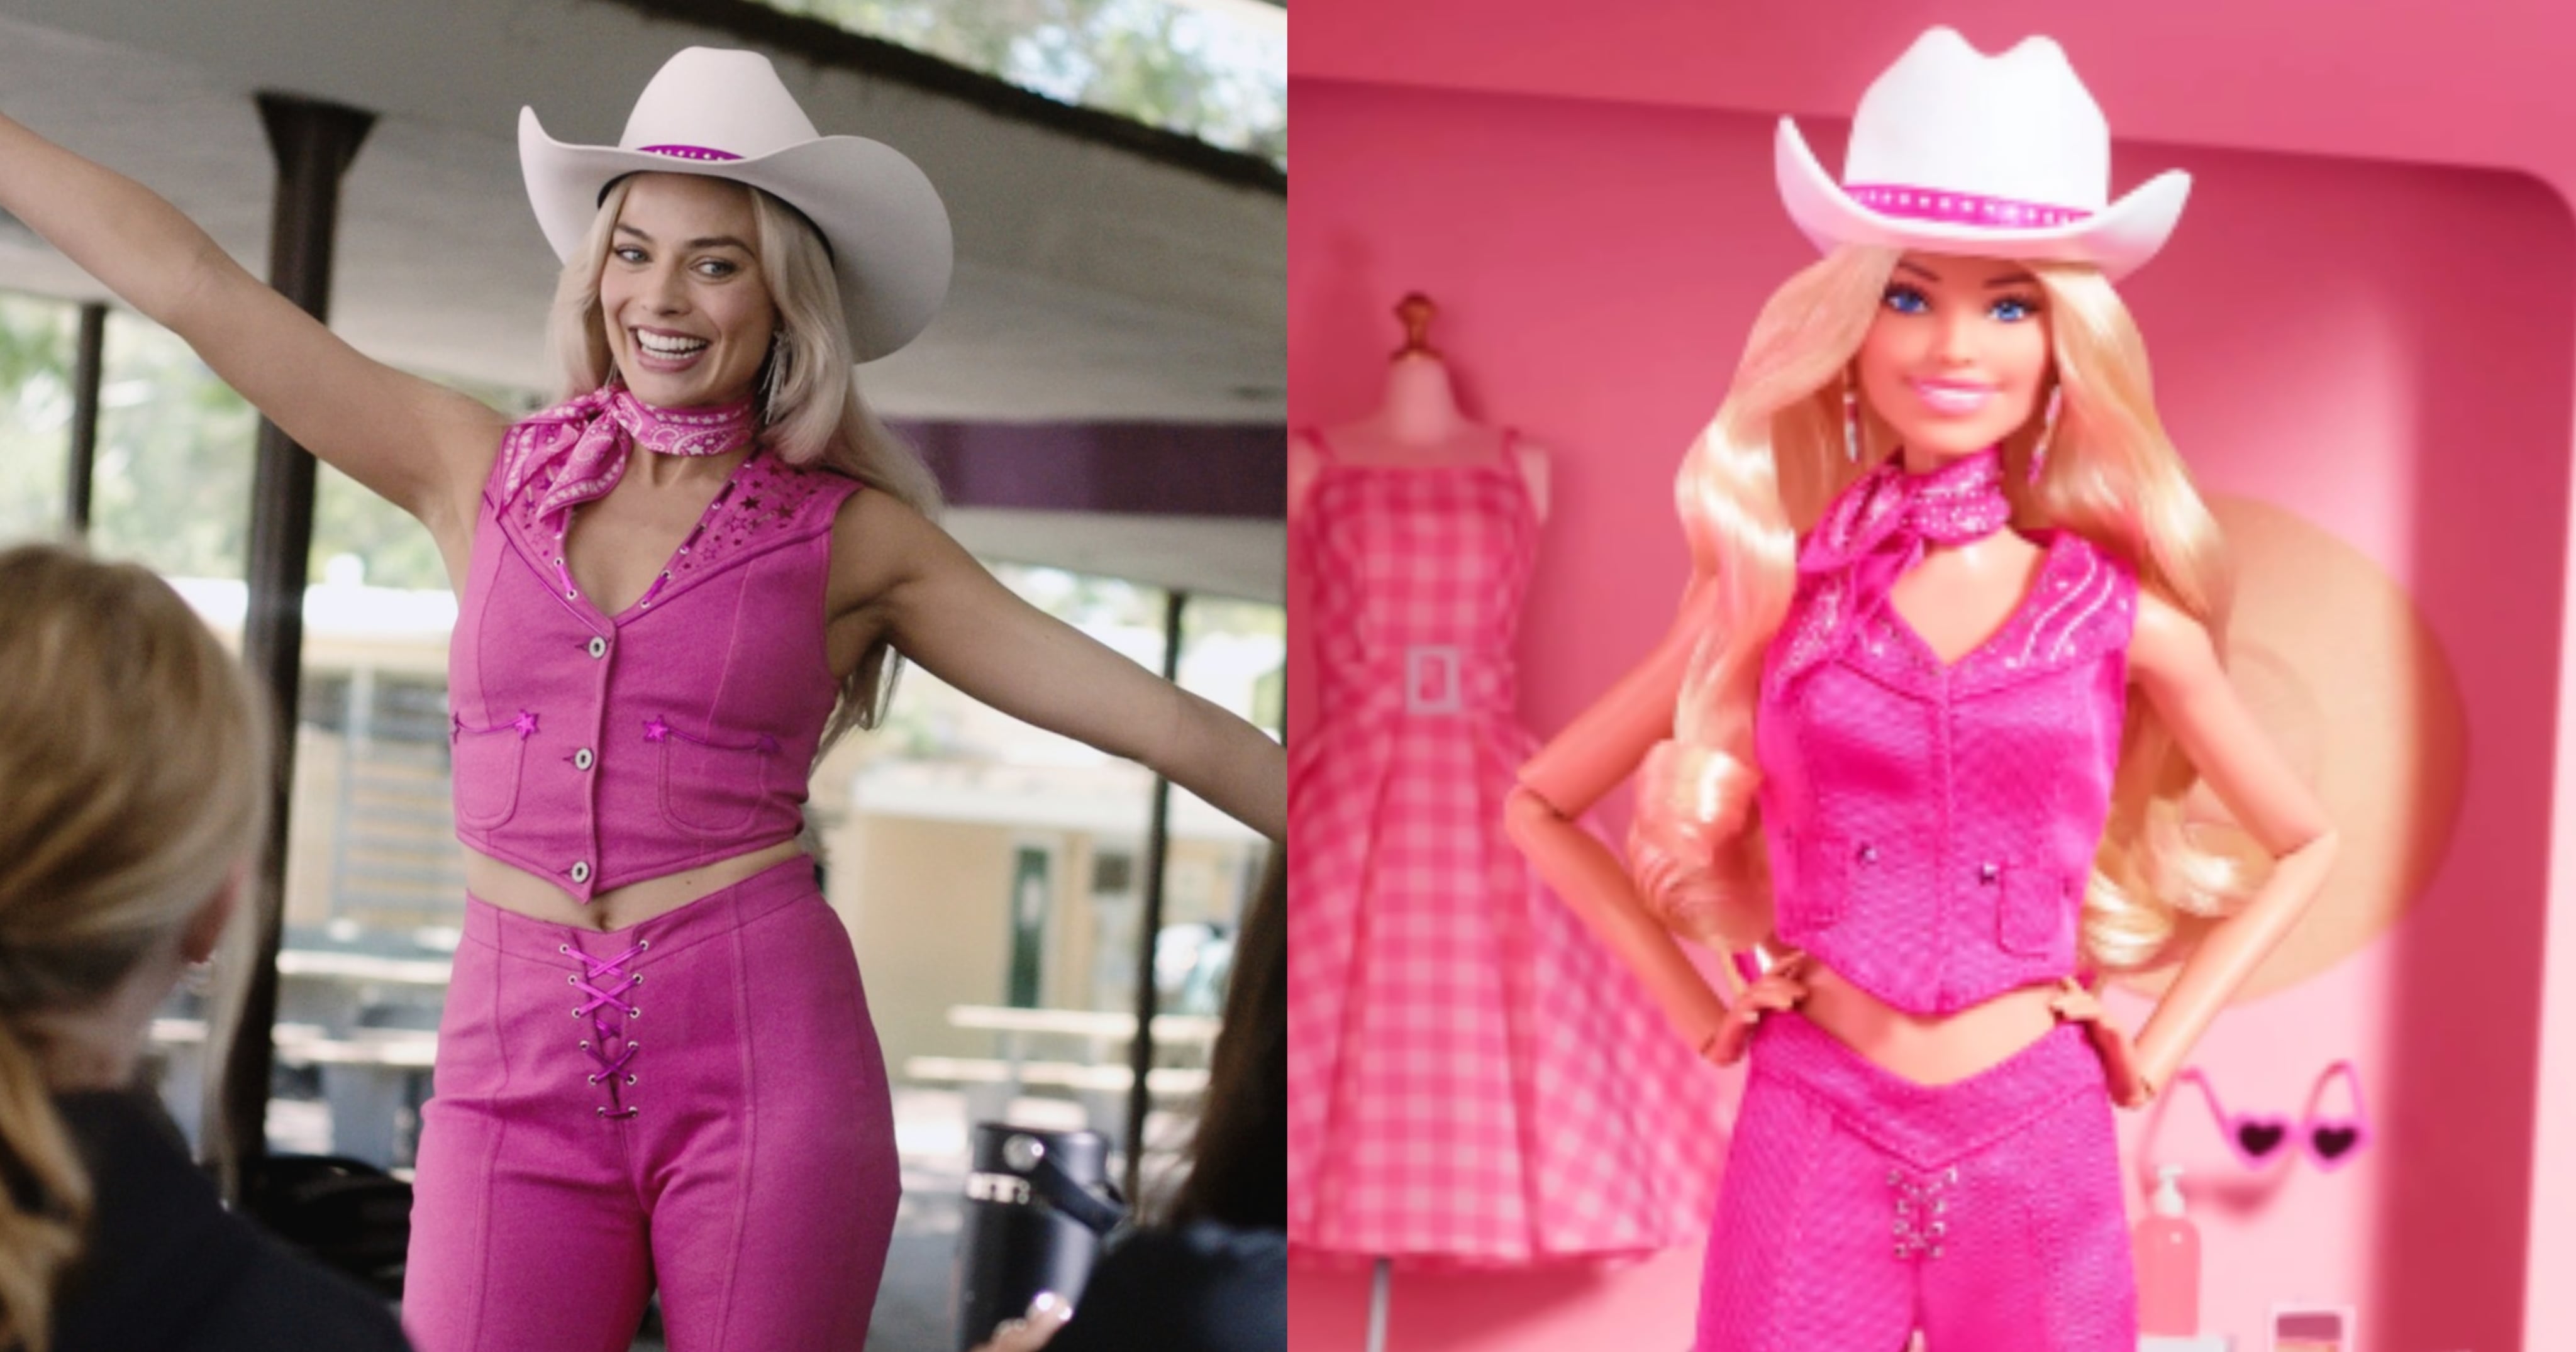 See the New “Barbie” Dolls Next to Their Movie Counterparts